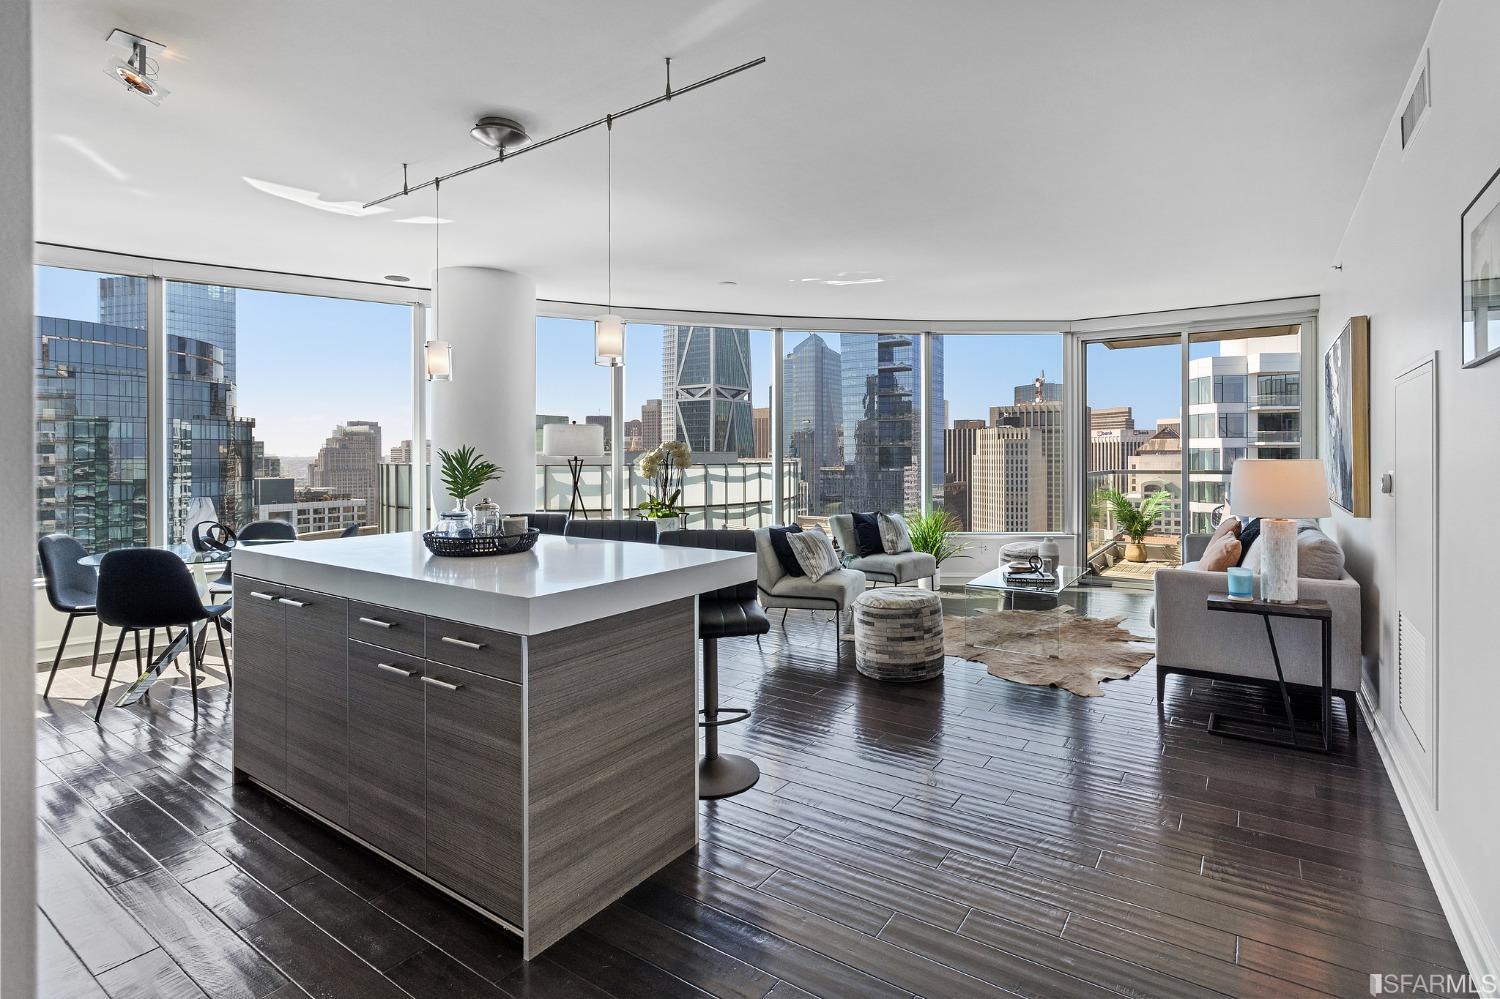 Residence 40E is a custom designed home sitting high up on one of the penthouse level floors.